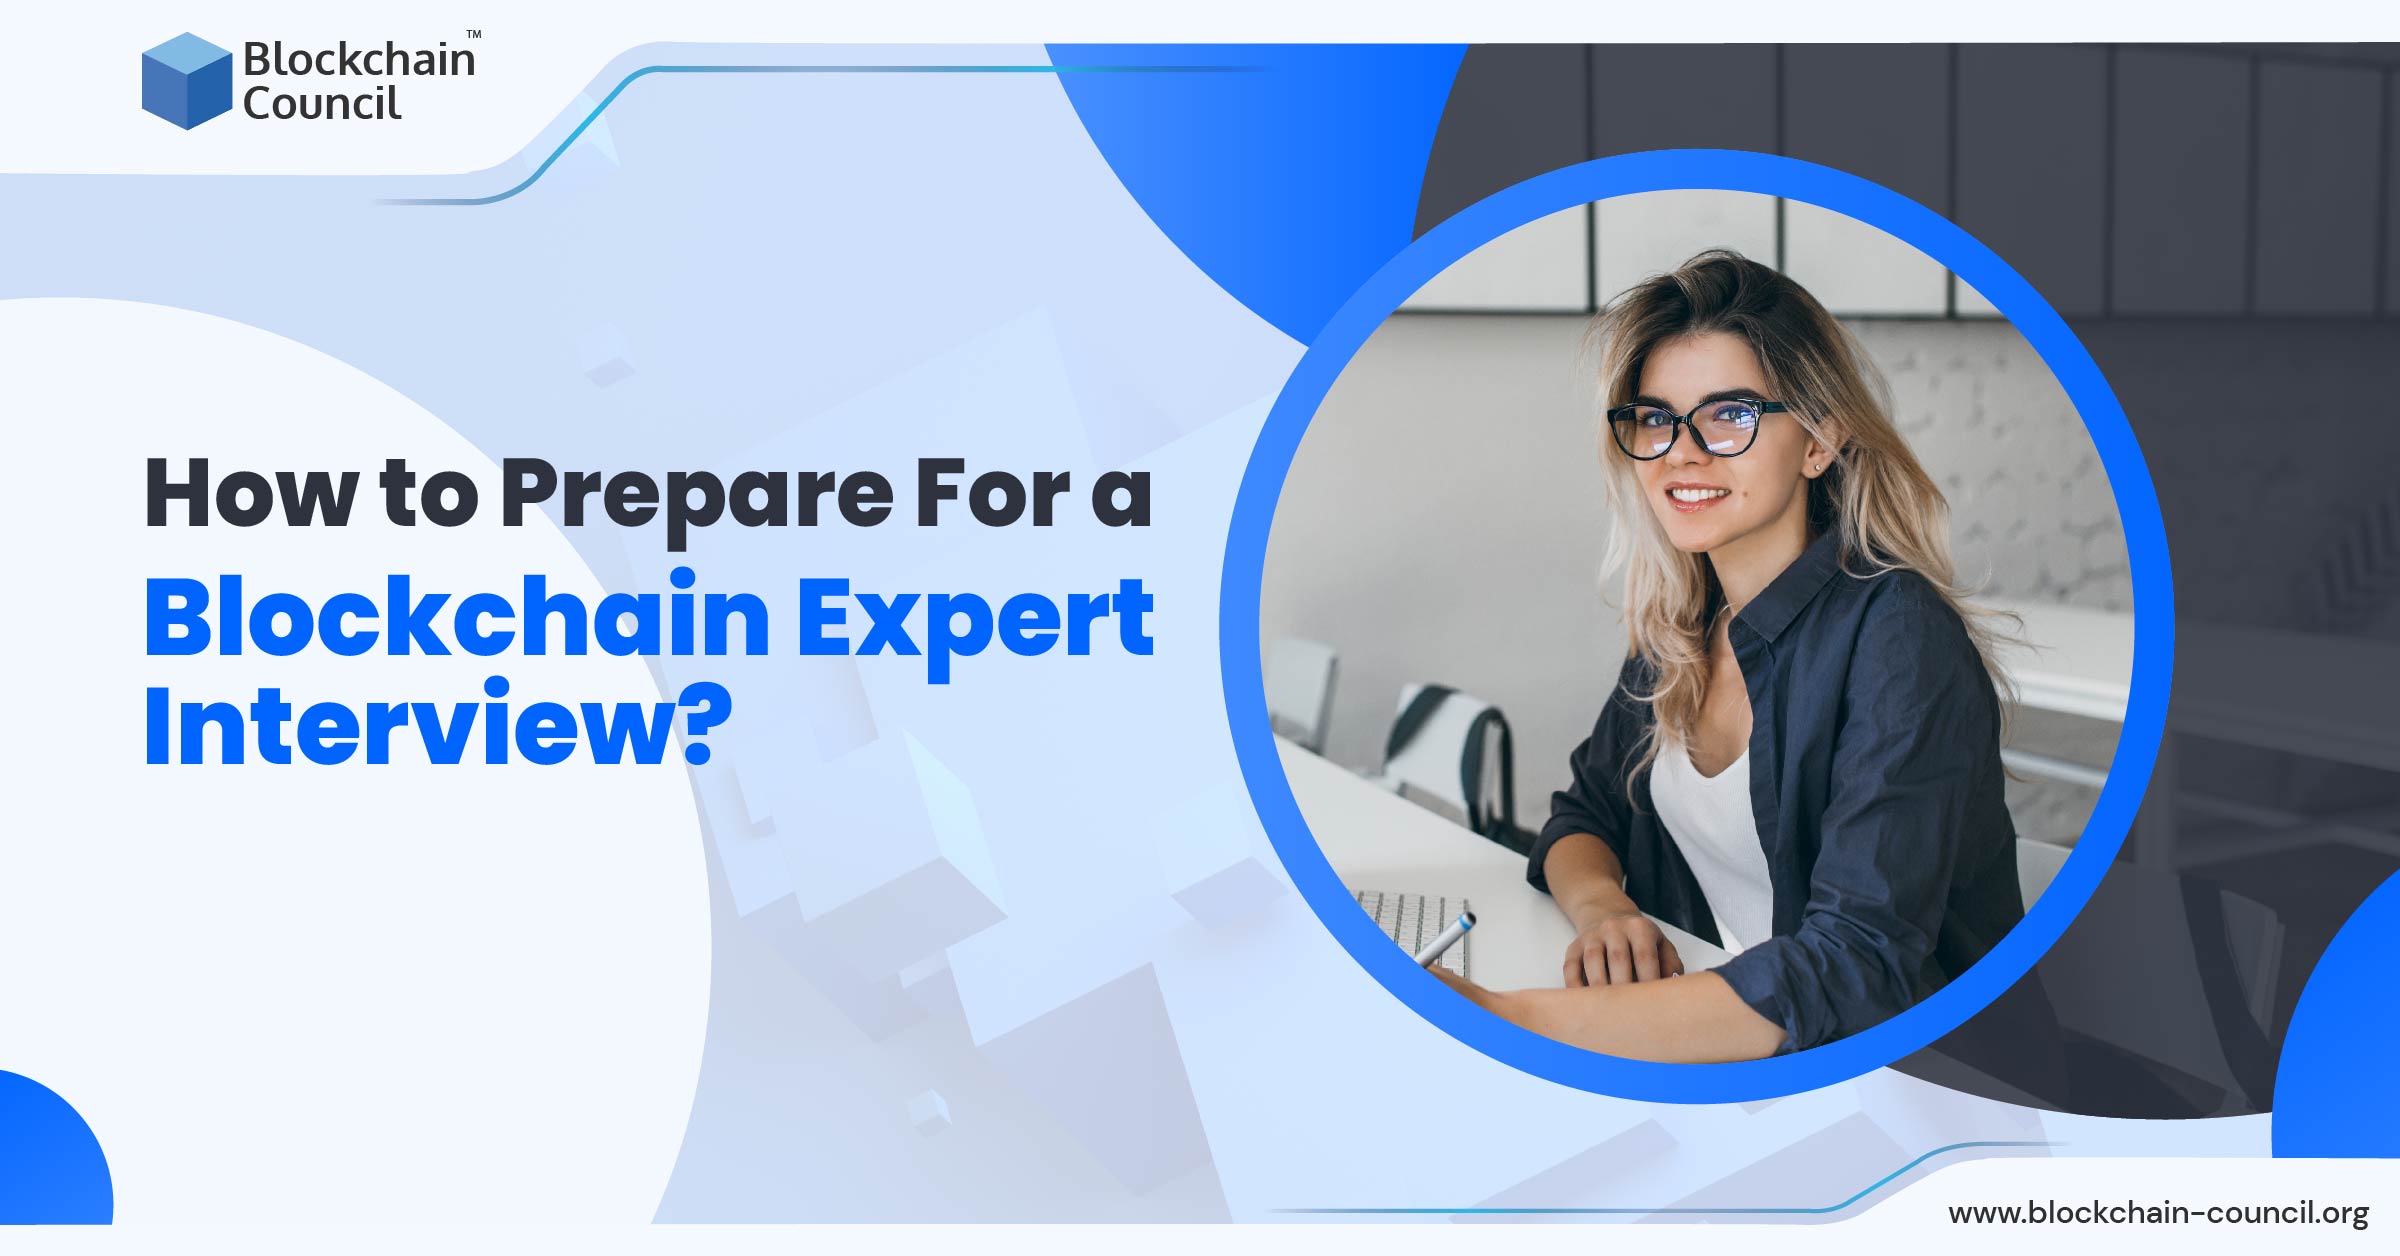 How to Prepare For a Blockchain Expert Interview?